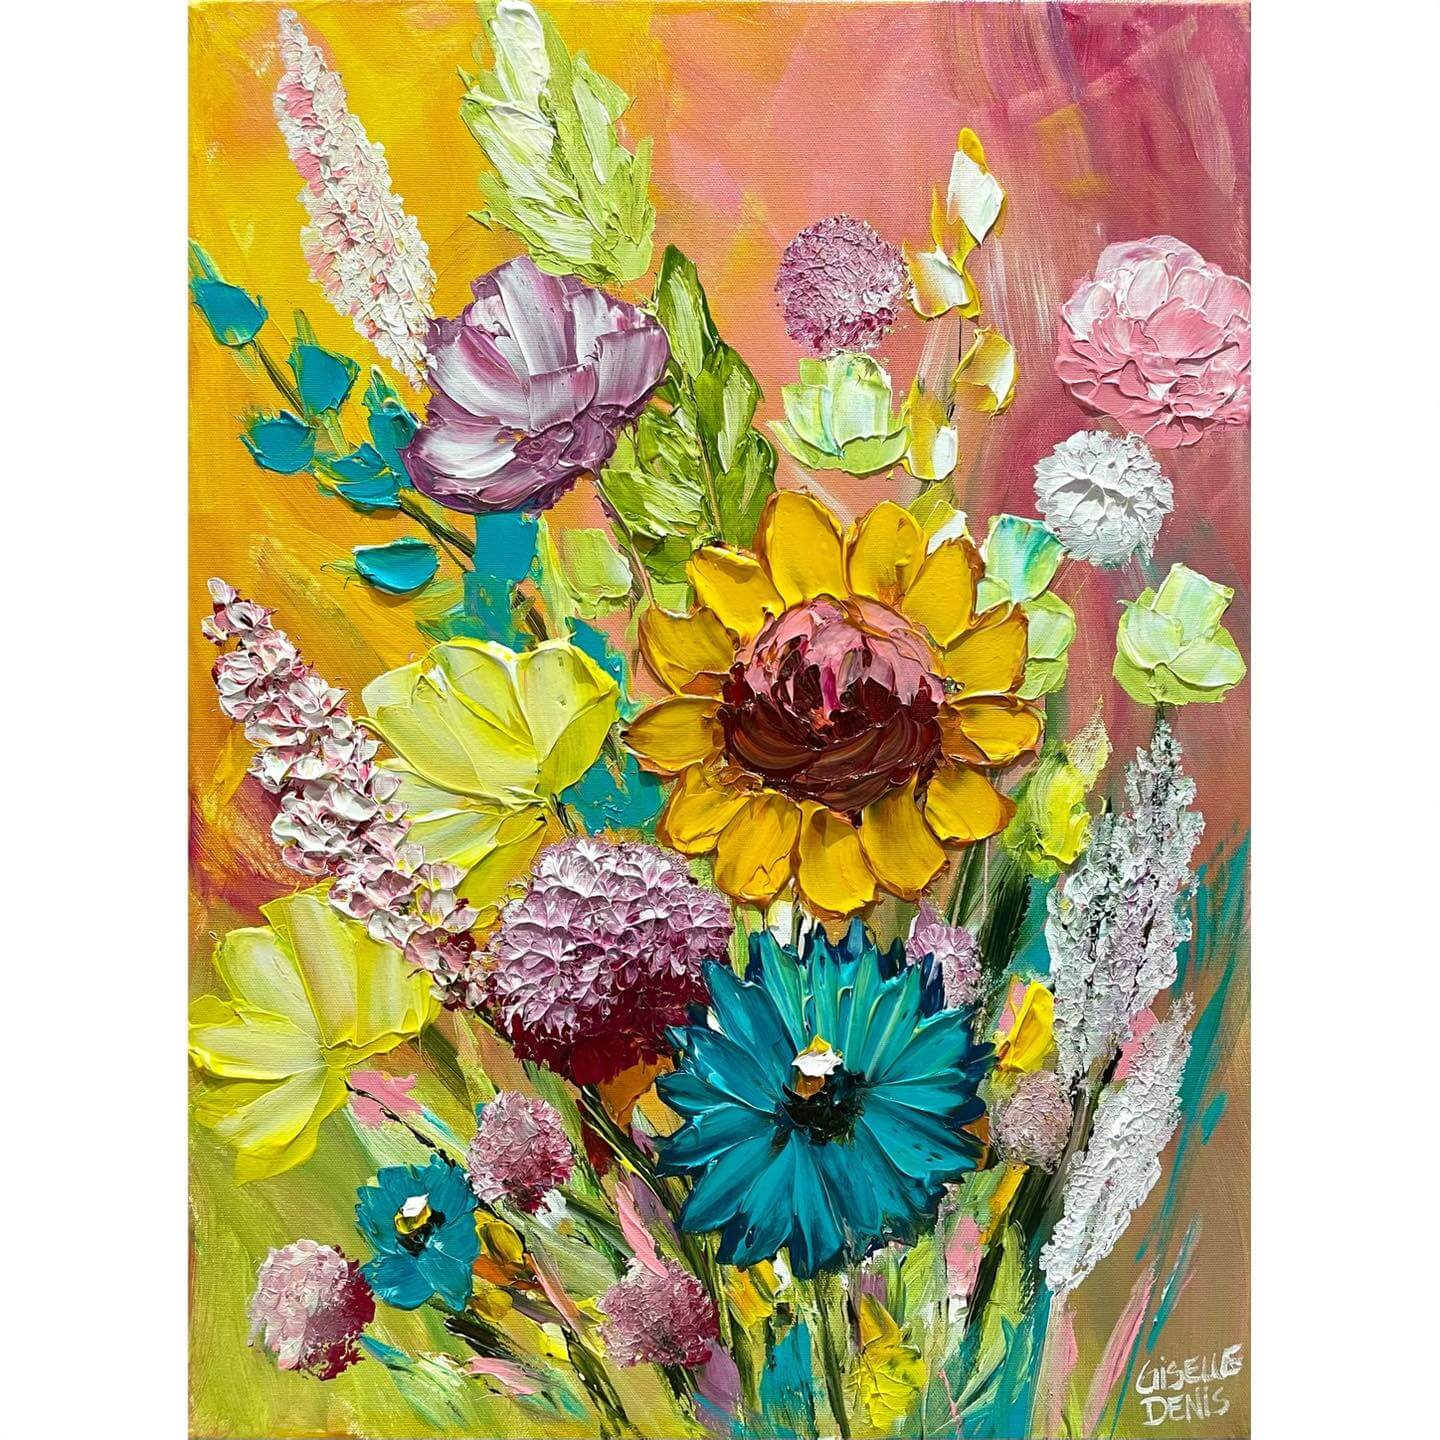 Painting of different colorful flowers by Giselle Denis.